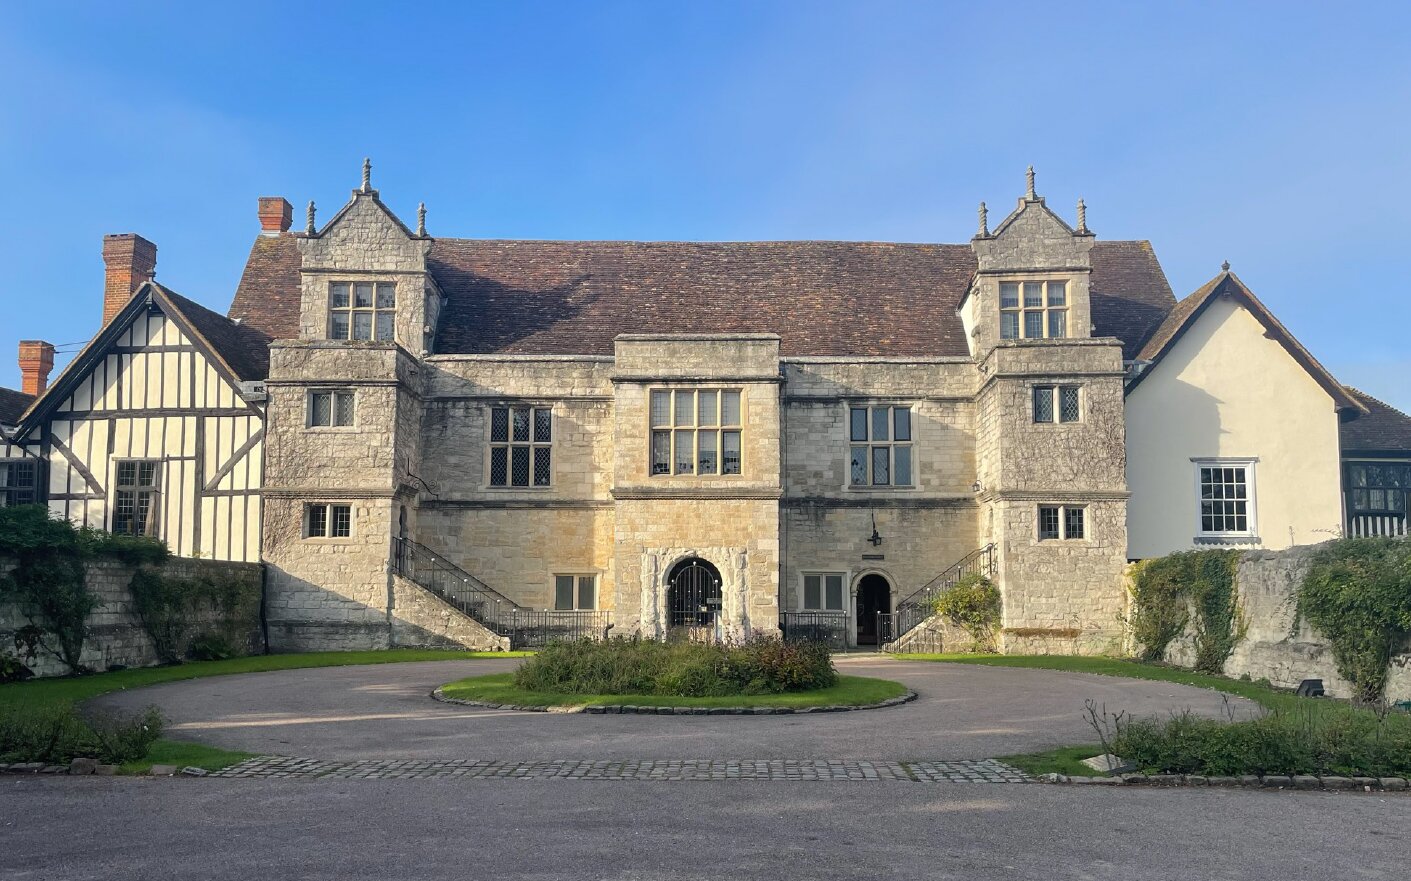 Property to let: The Archbishop’s Palace, Maidstone